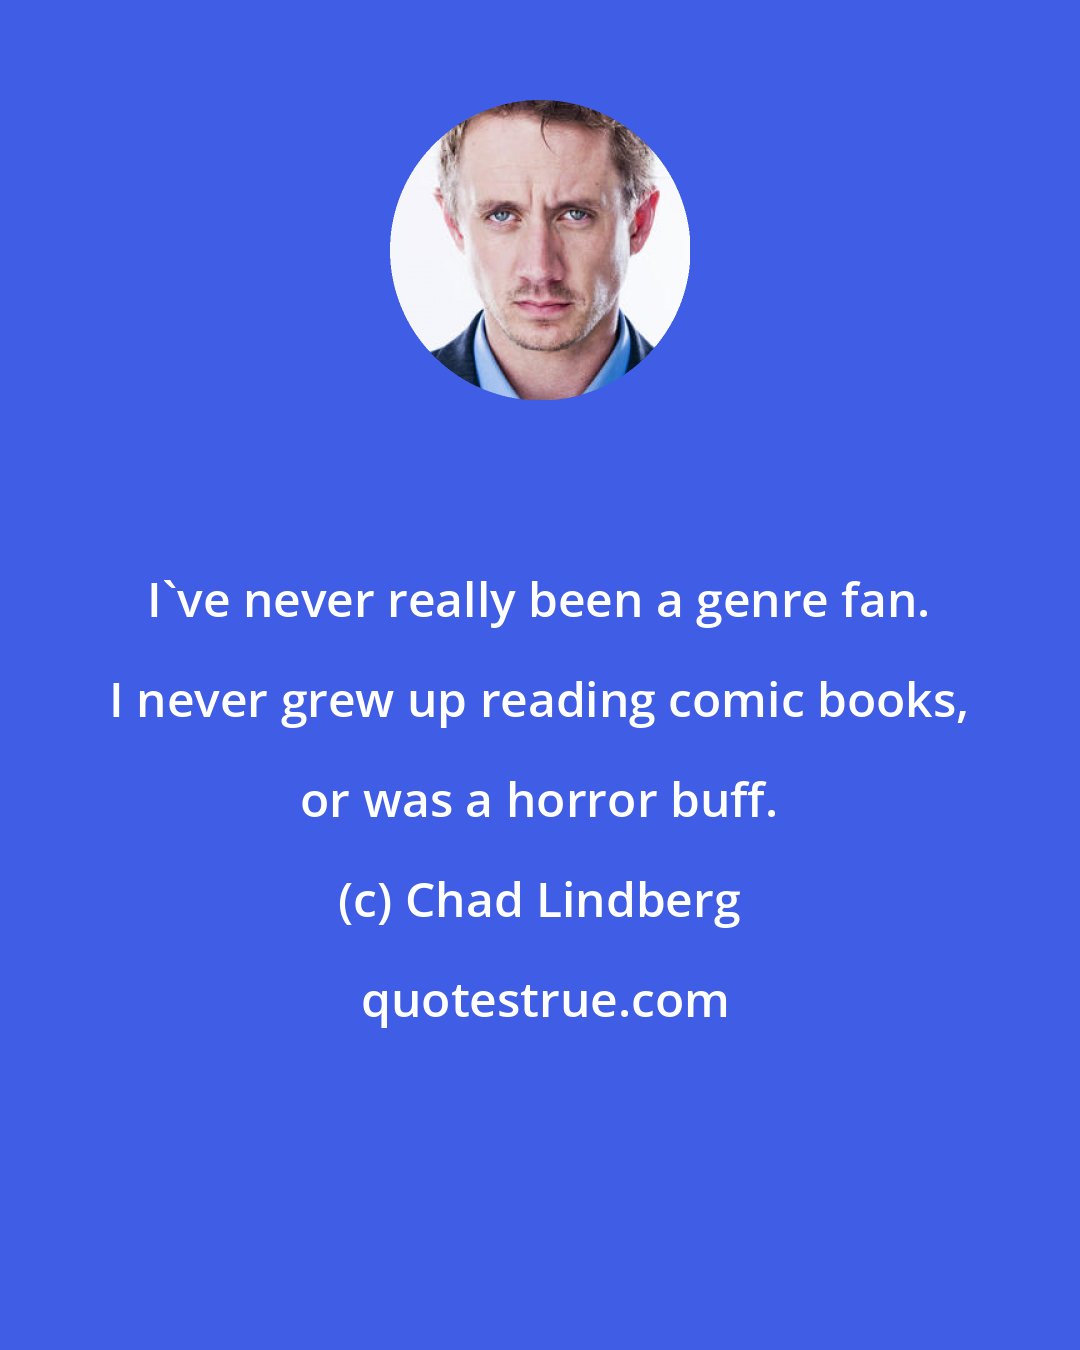 Chad Lindberg: I've never really been a genre fan. I never grew up reading comic books, or was a horror buff.